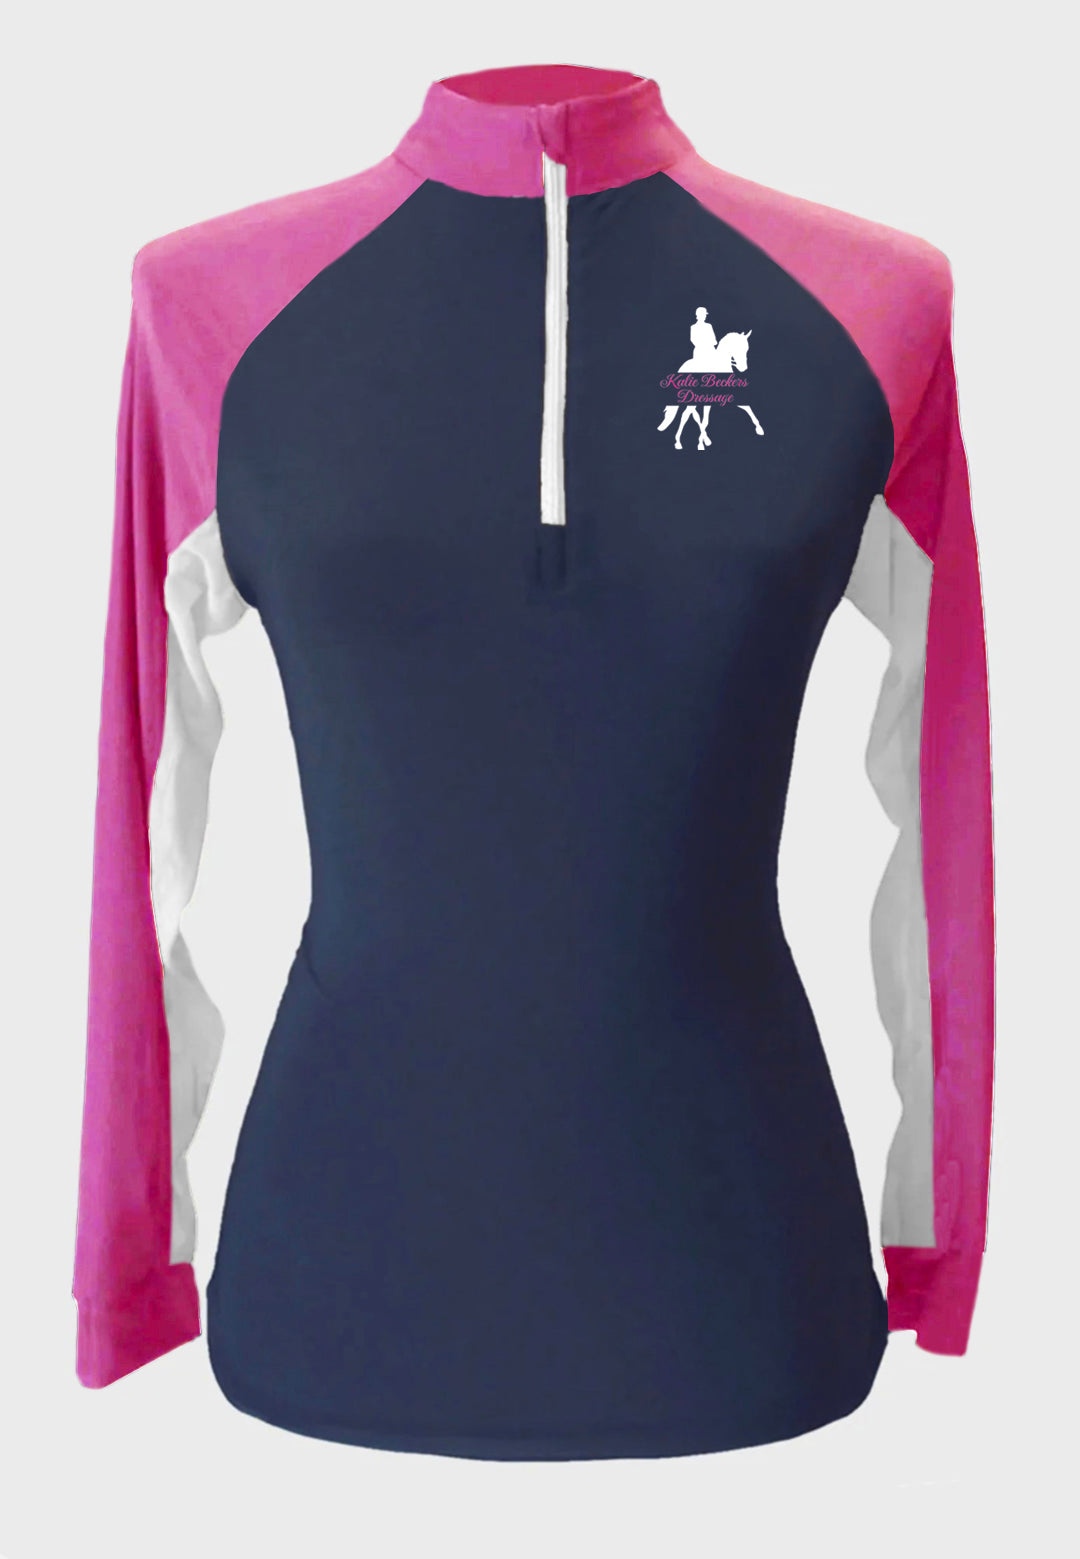 Kalie Becker Dressage Navy Custom Sun Shirt  - Adult and Youth Sizes - Hot Pink Sleeves